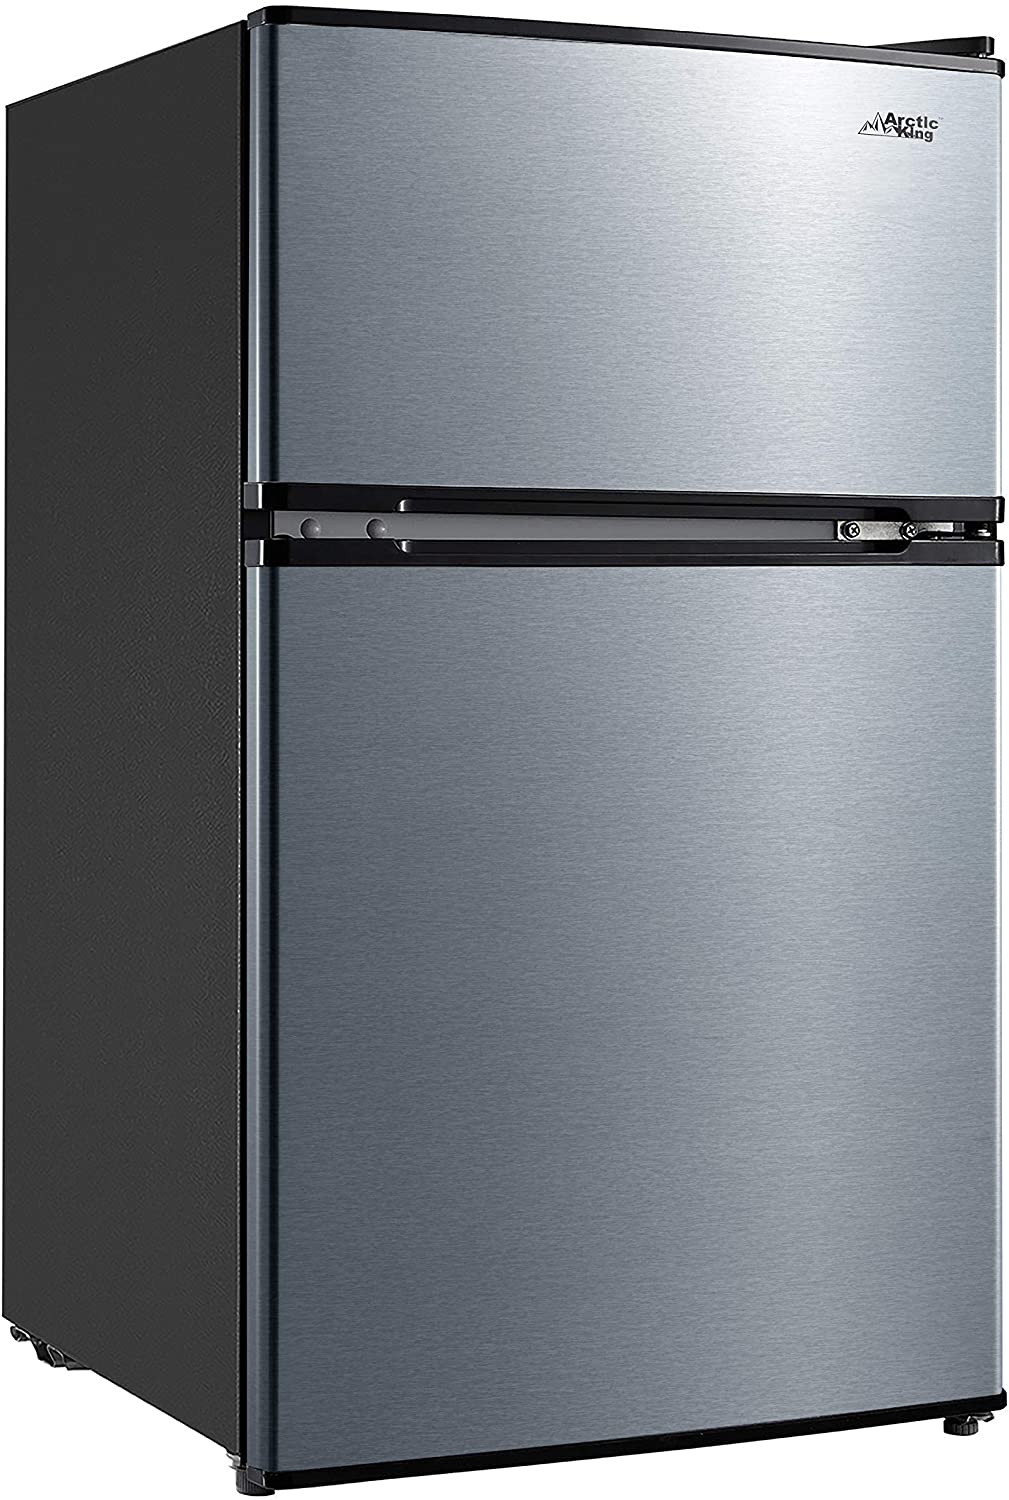 Arctic King 3.2 Cu ft Two Door Compact Refrigerator with Freezer, Stainless  Steel, E-star 